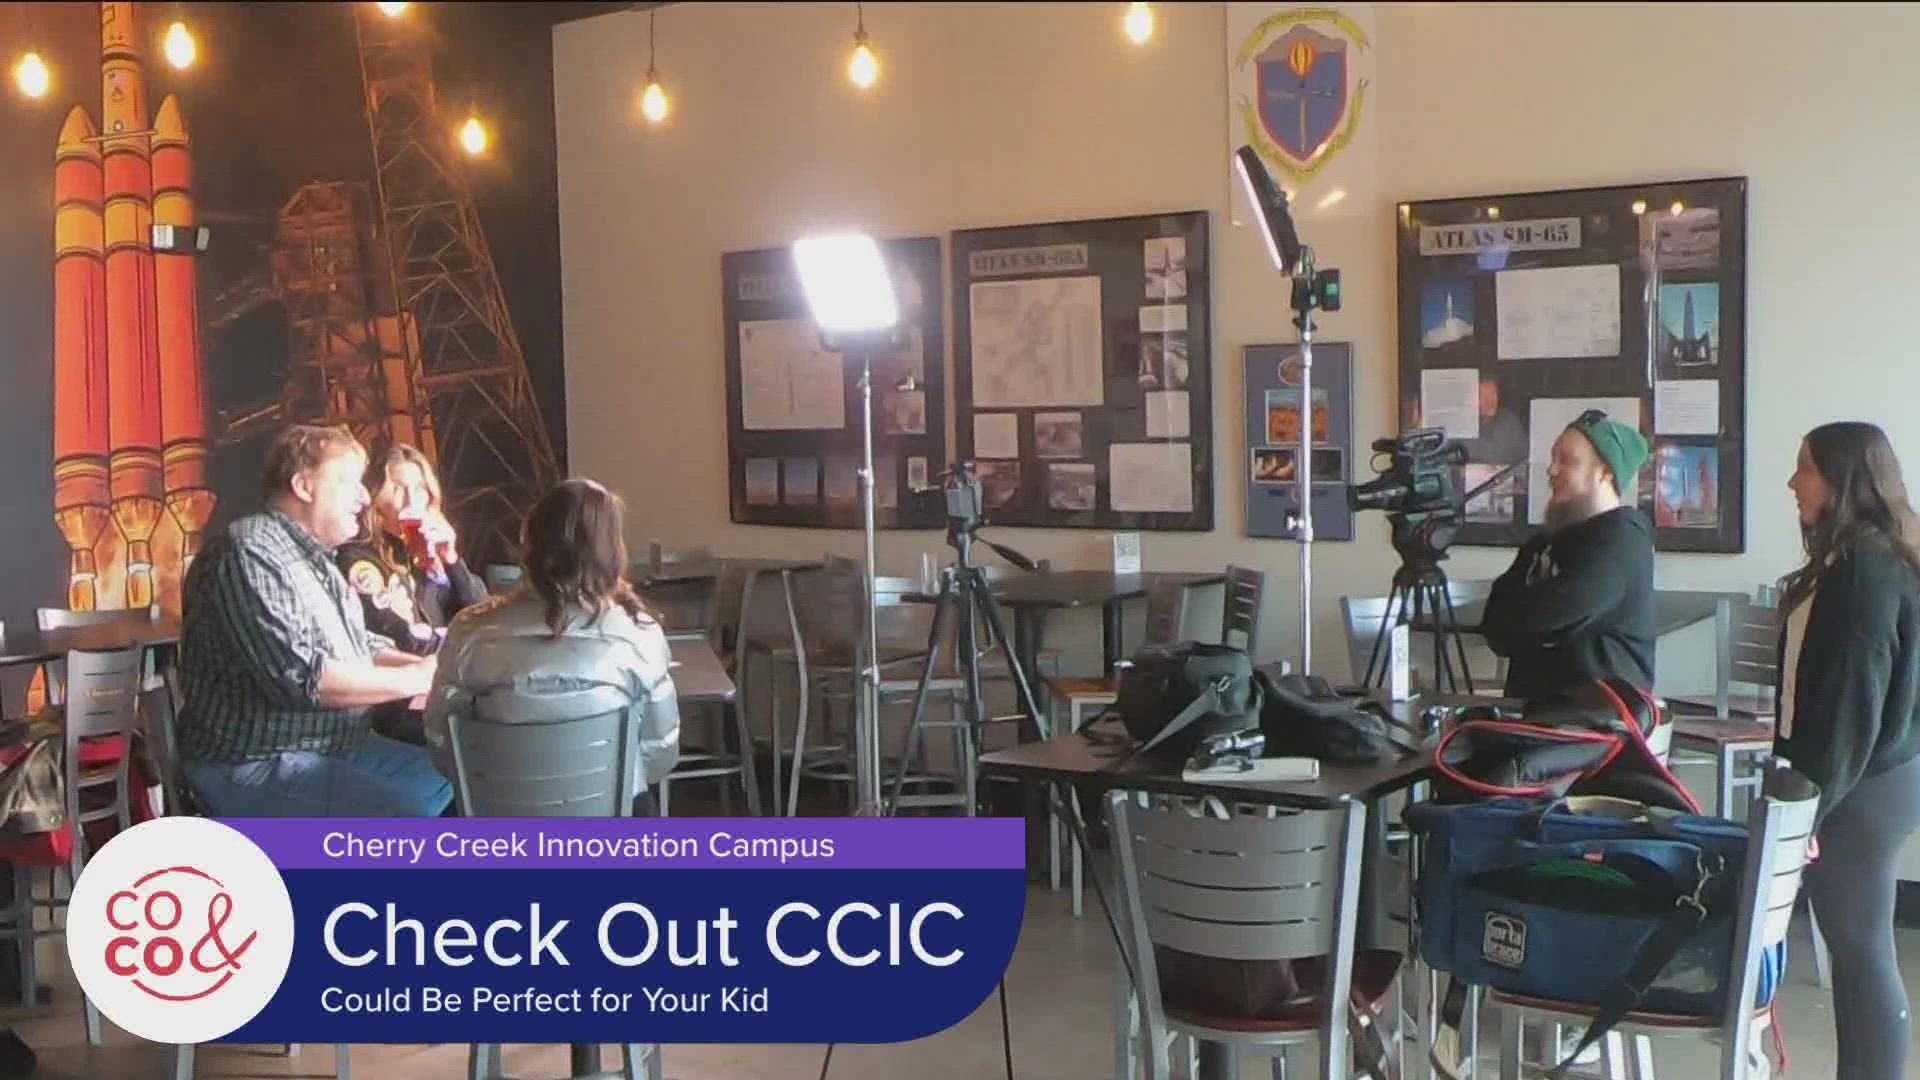 CCIC is a career exploration and prep program for students in Cherry Creek School District. Learn more and get your child enrolled at CherryCreekSchools.org/CCIC.